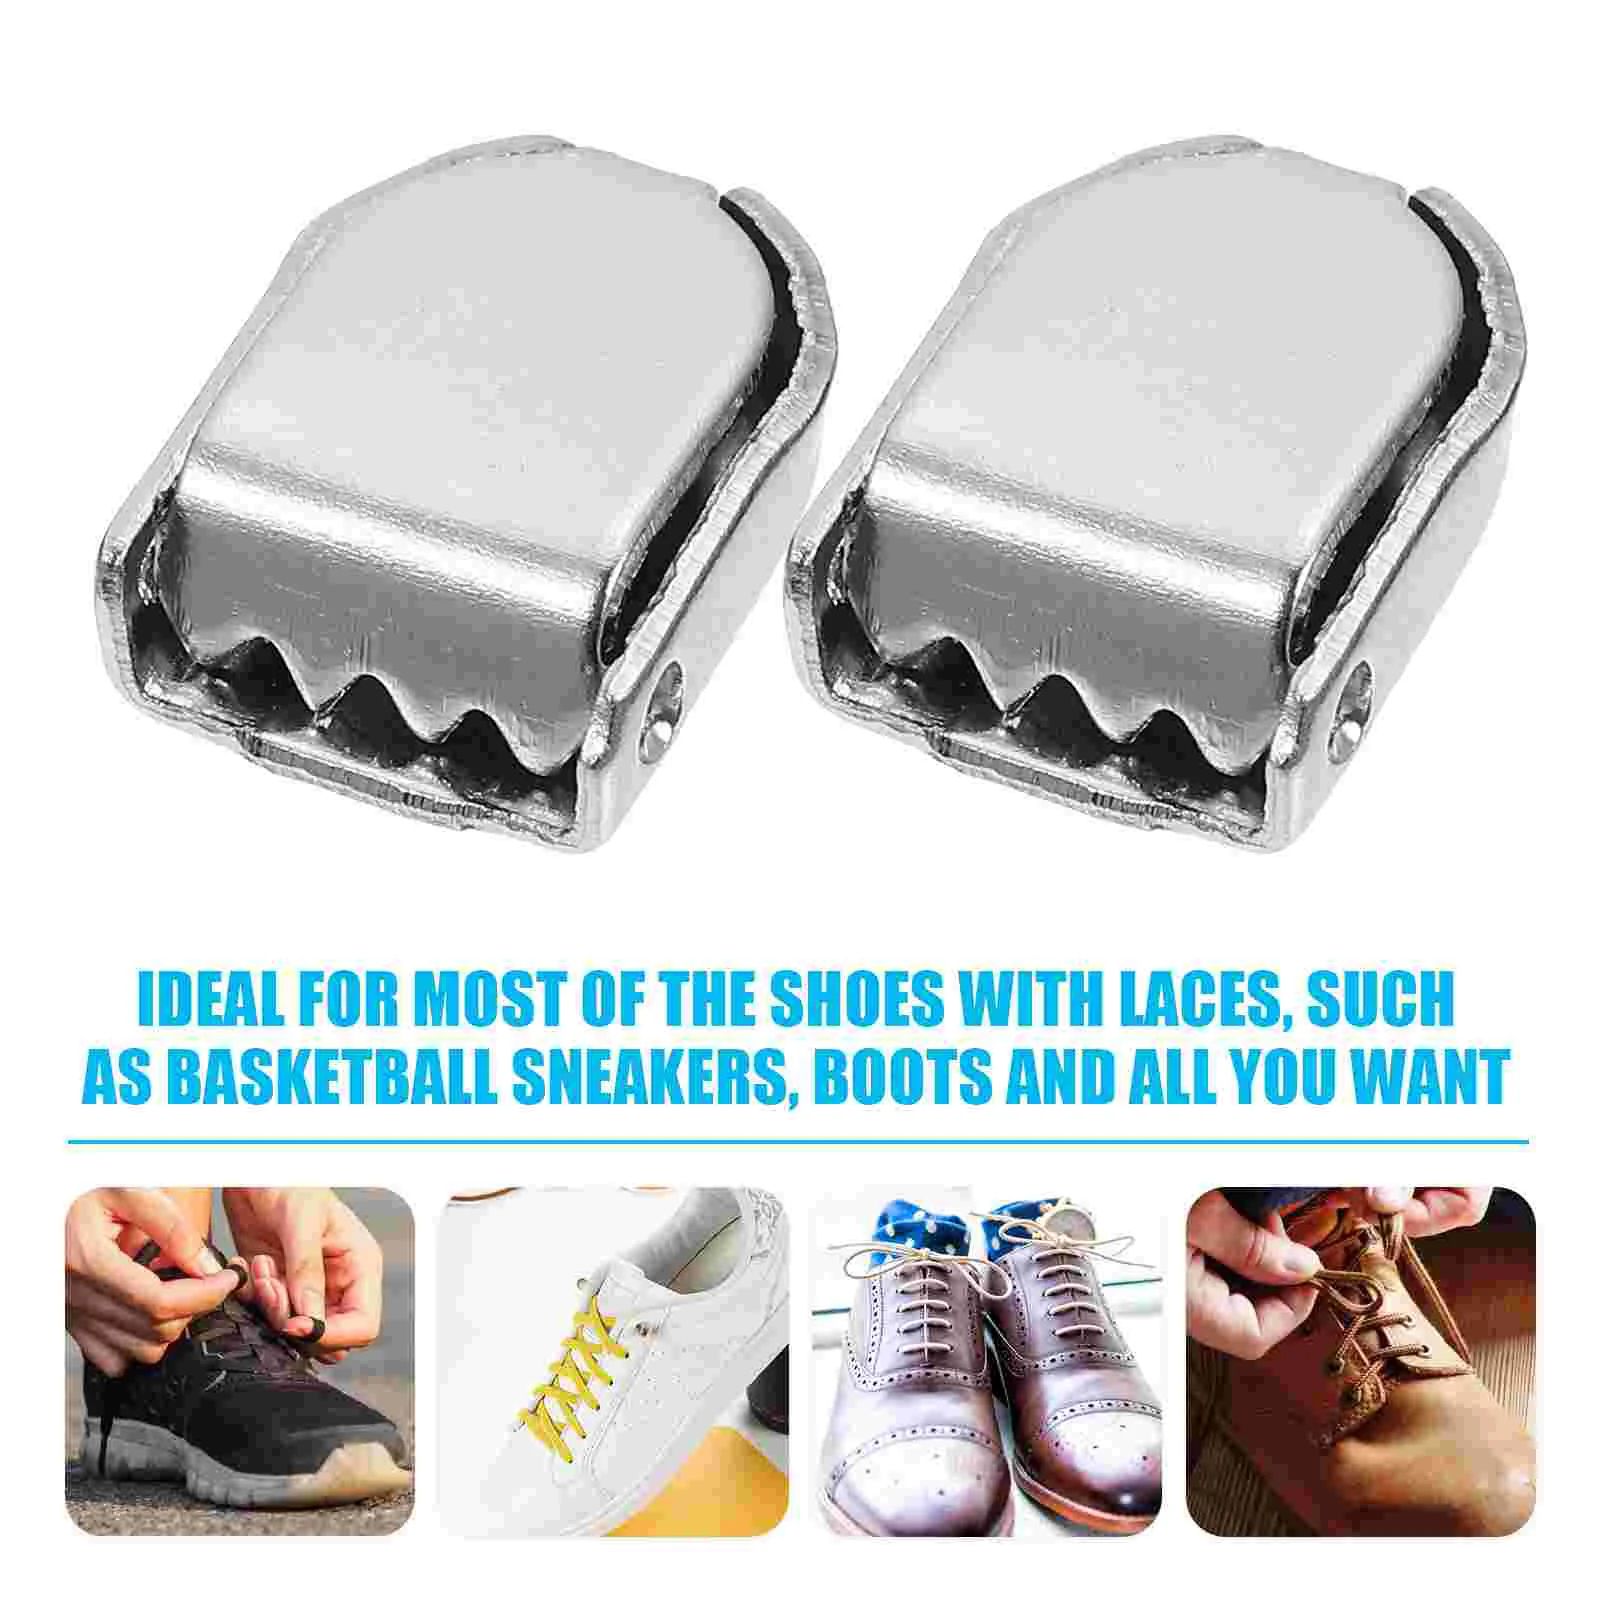 100pcs Shoe Laces Gym Shoes Tail Buckles Gym Shoes Lock Buckles Metal White Gym Shoess